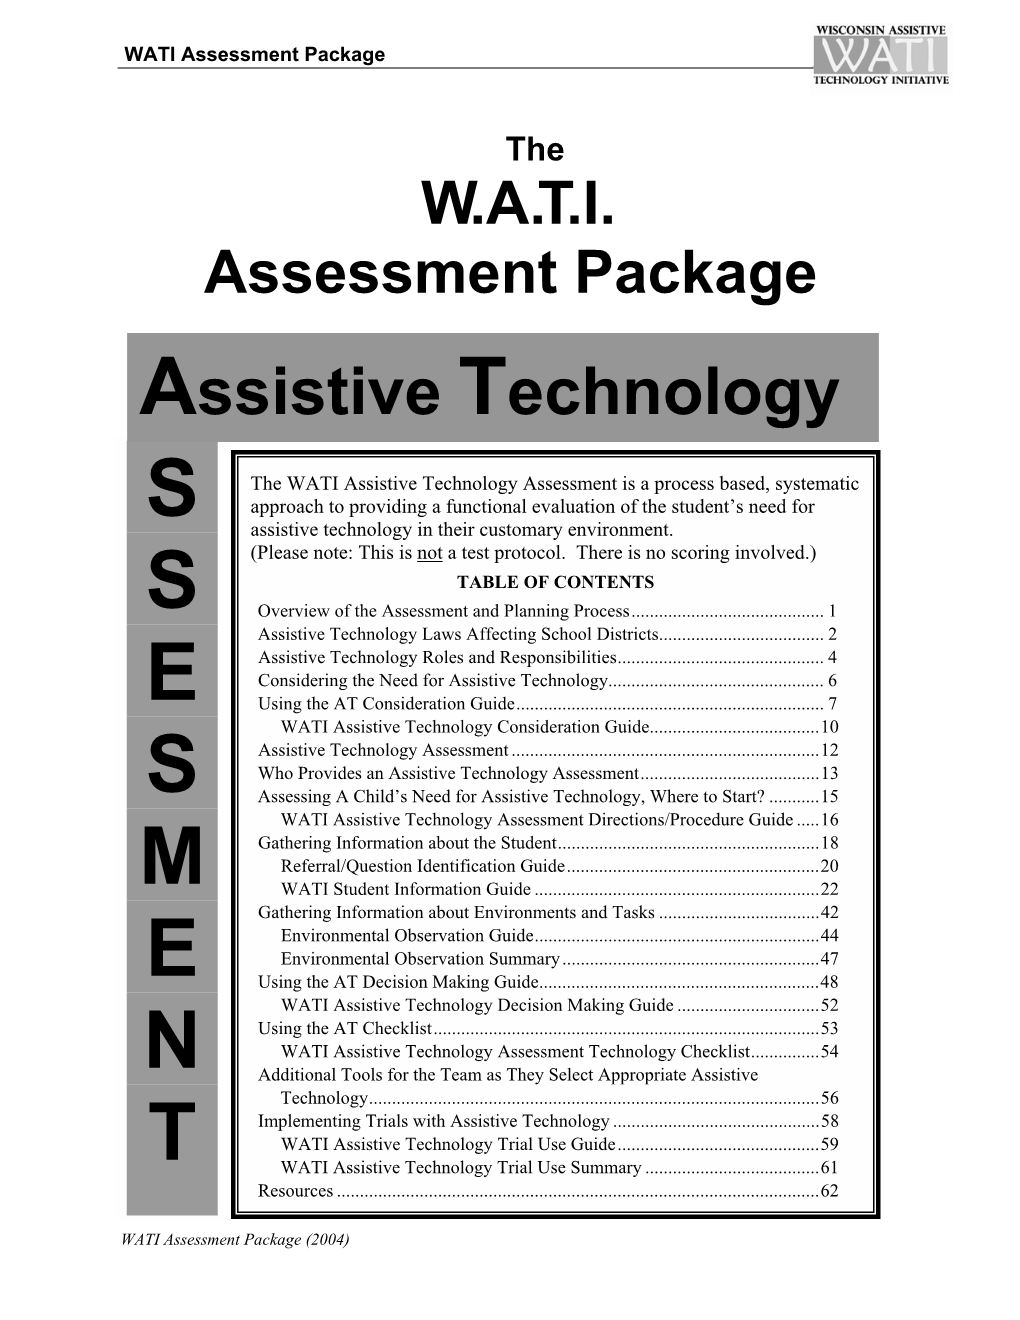 The WATI Assessment Package